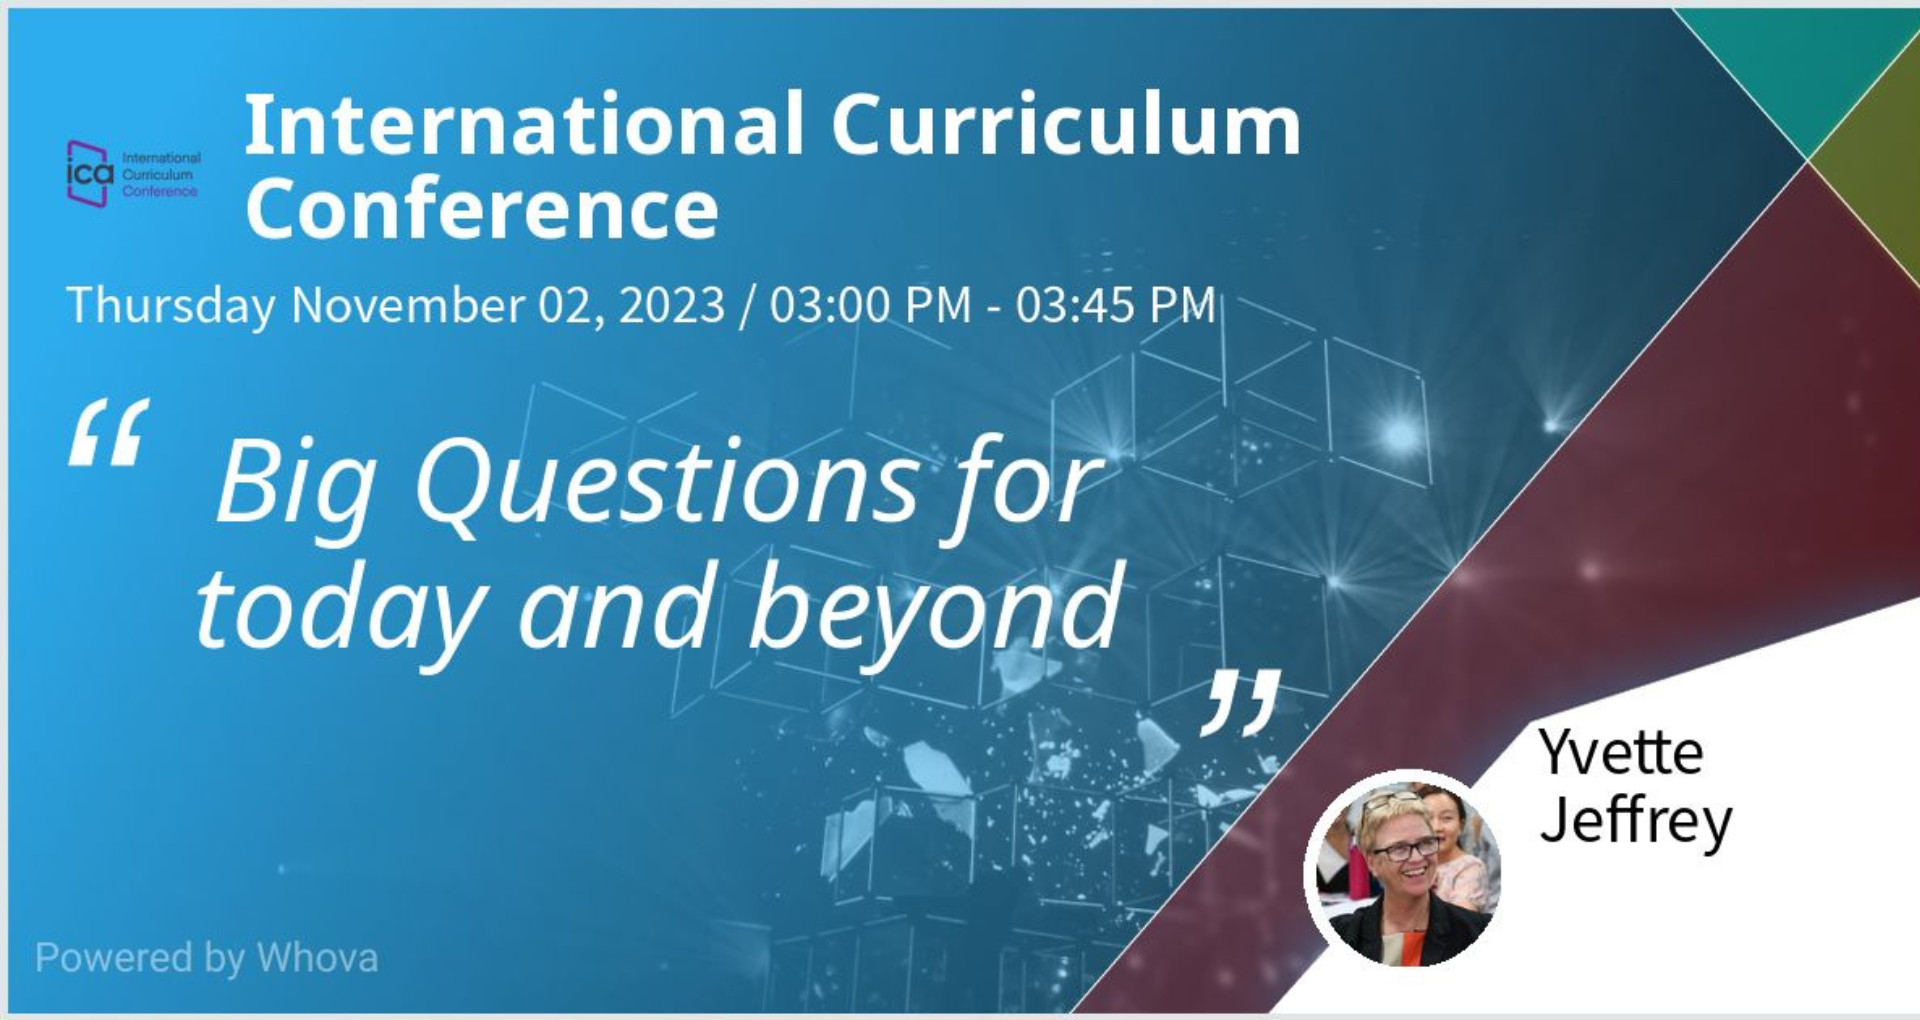 Mrs. Yvette Jeffrey became the International Curriculum Conference's speaker 